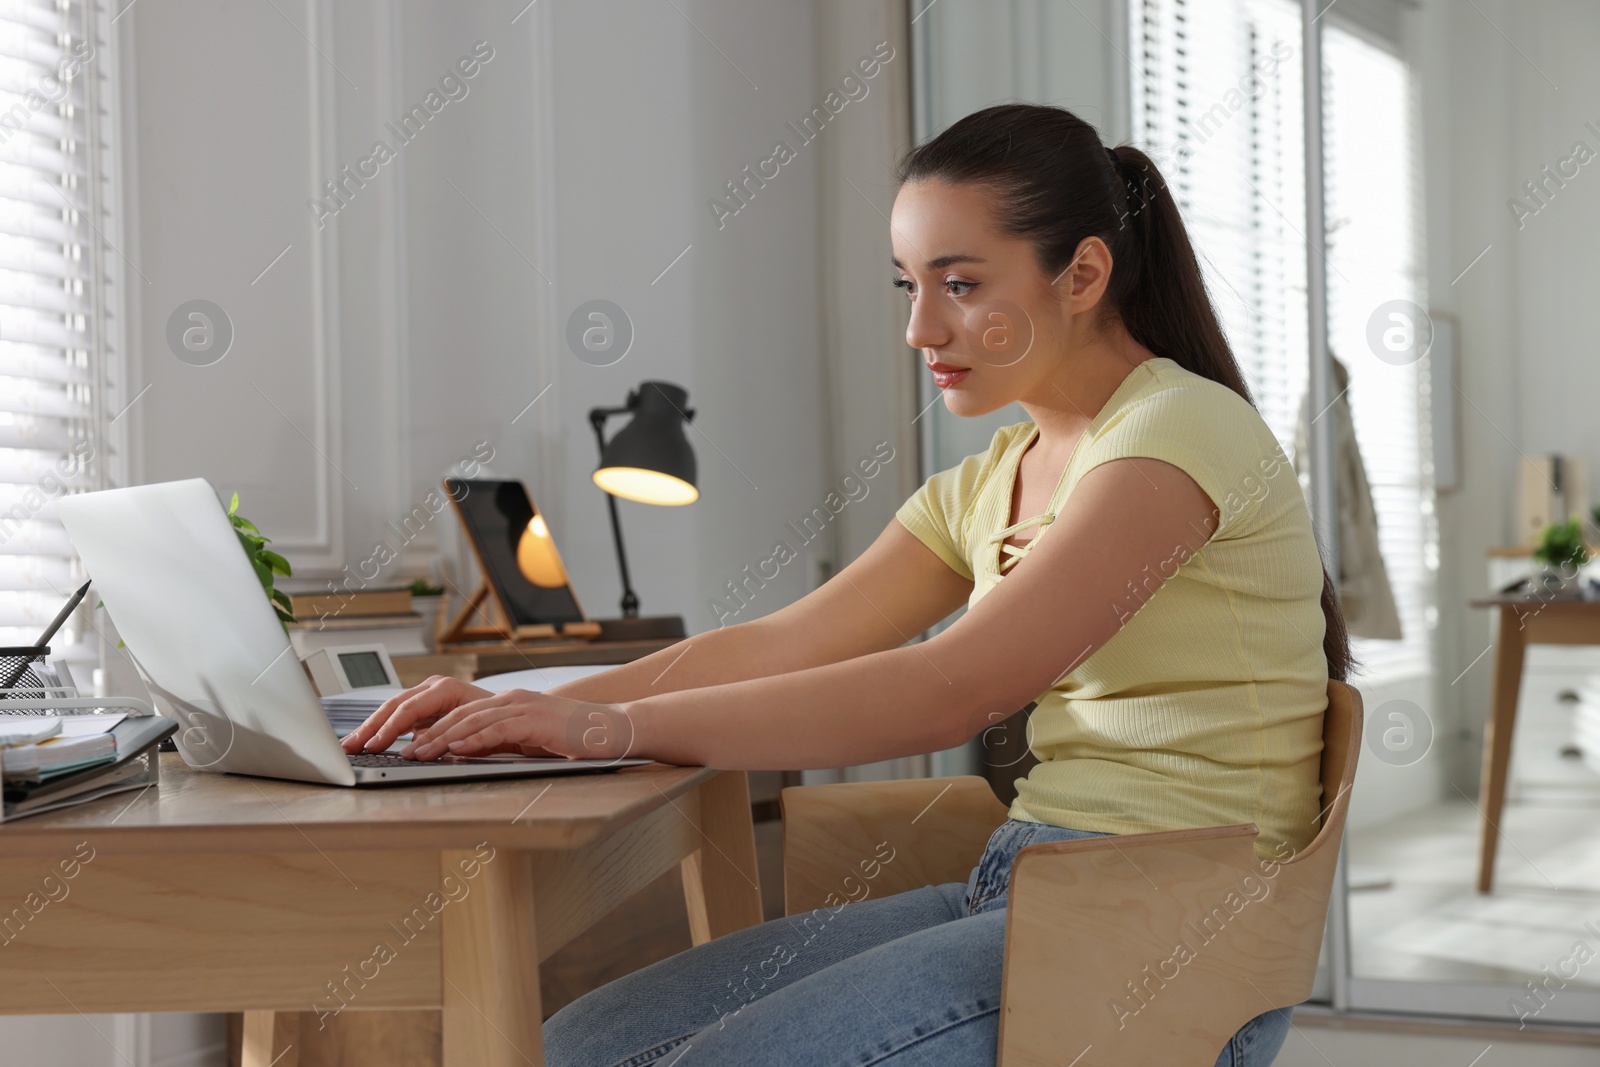 Photo of Young woman with poor posture using laptop at table indoors